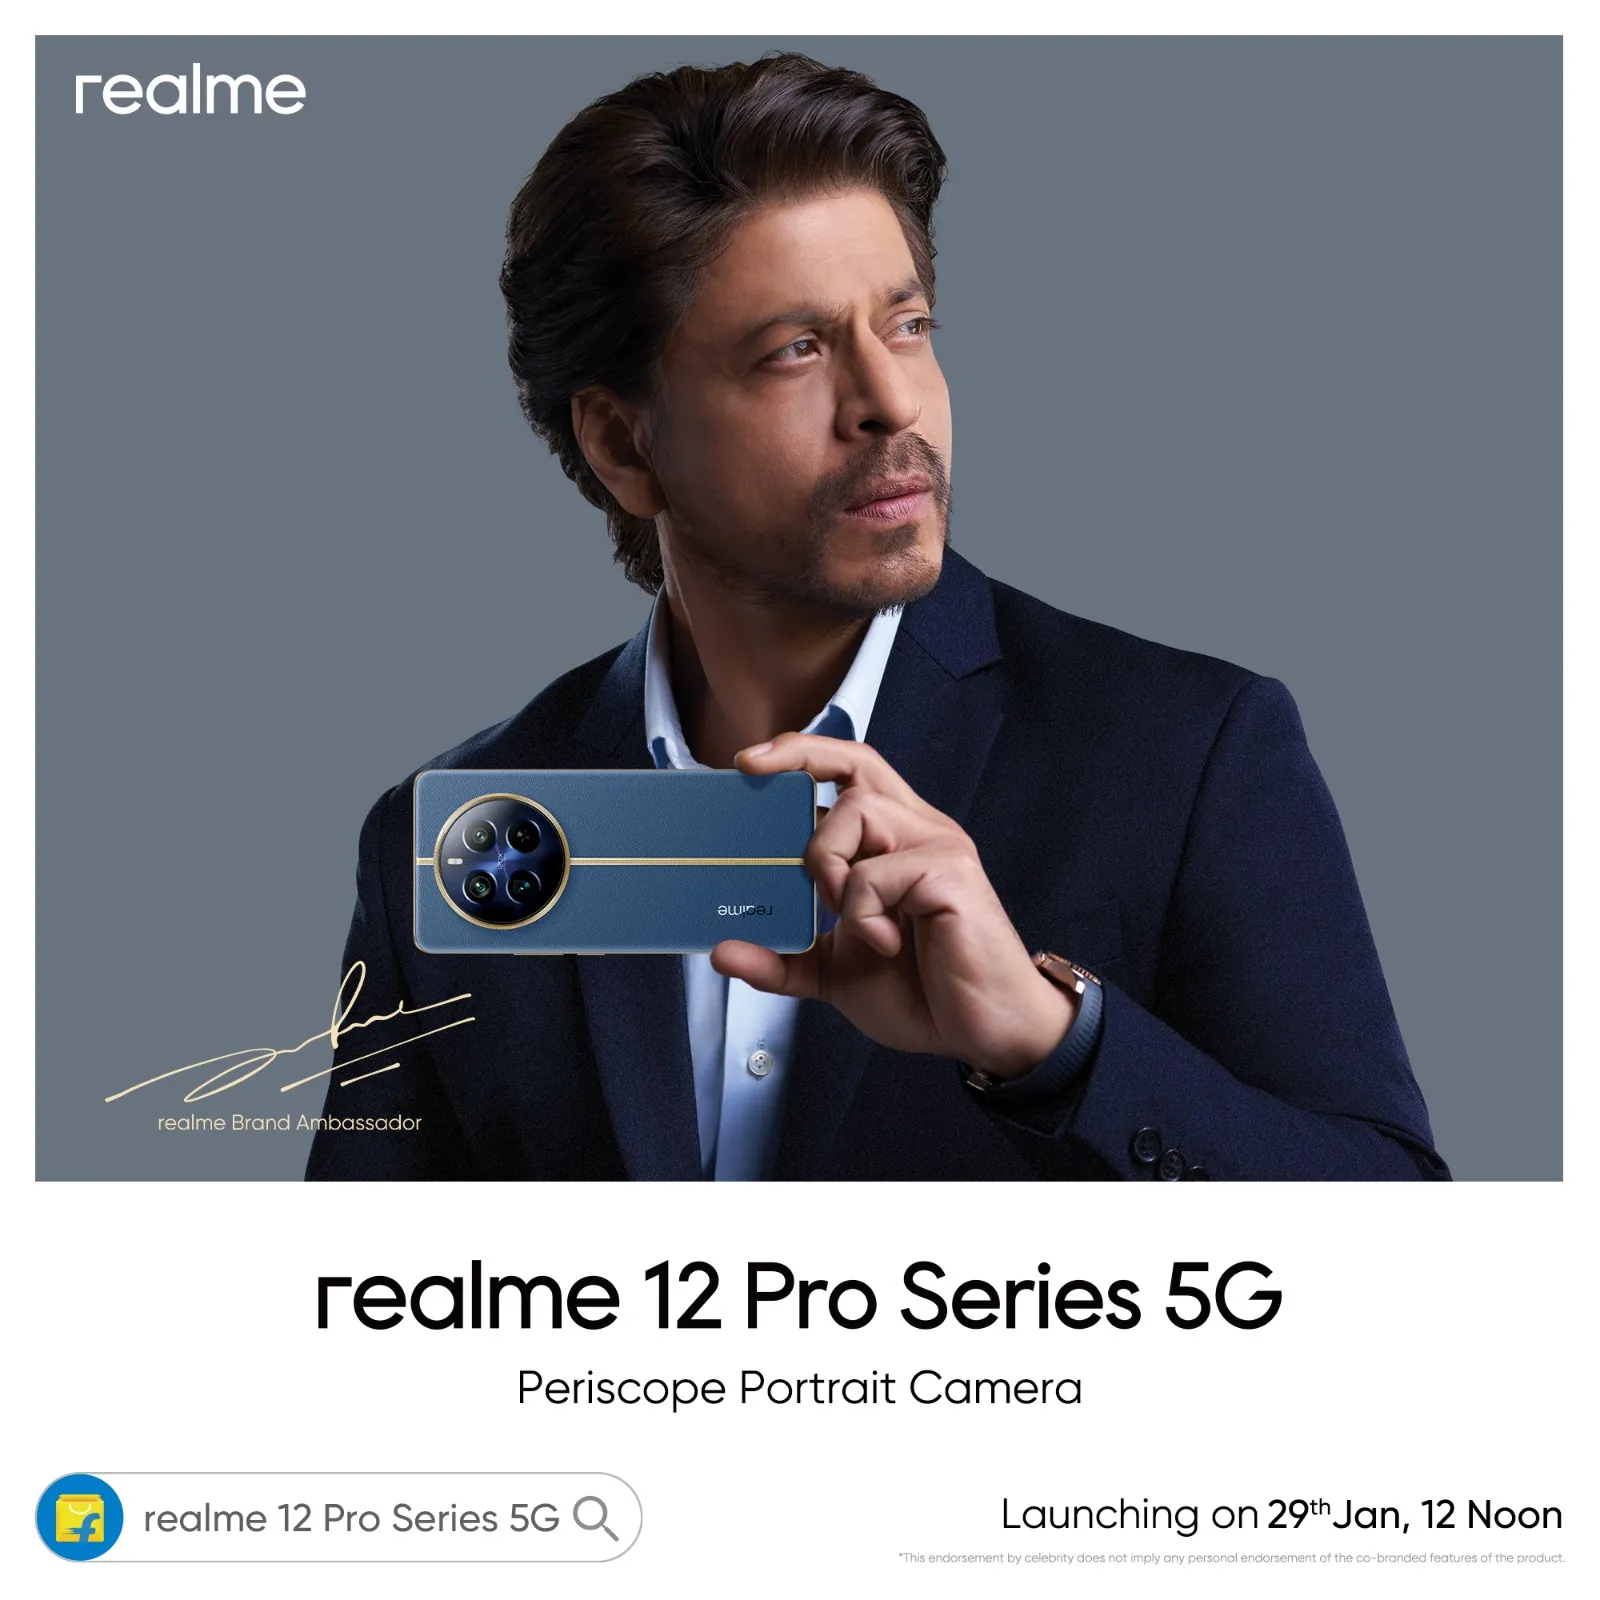 Realme India YouTube channel will be streaming the event